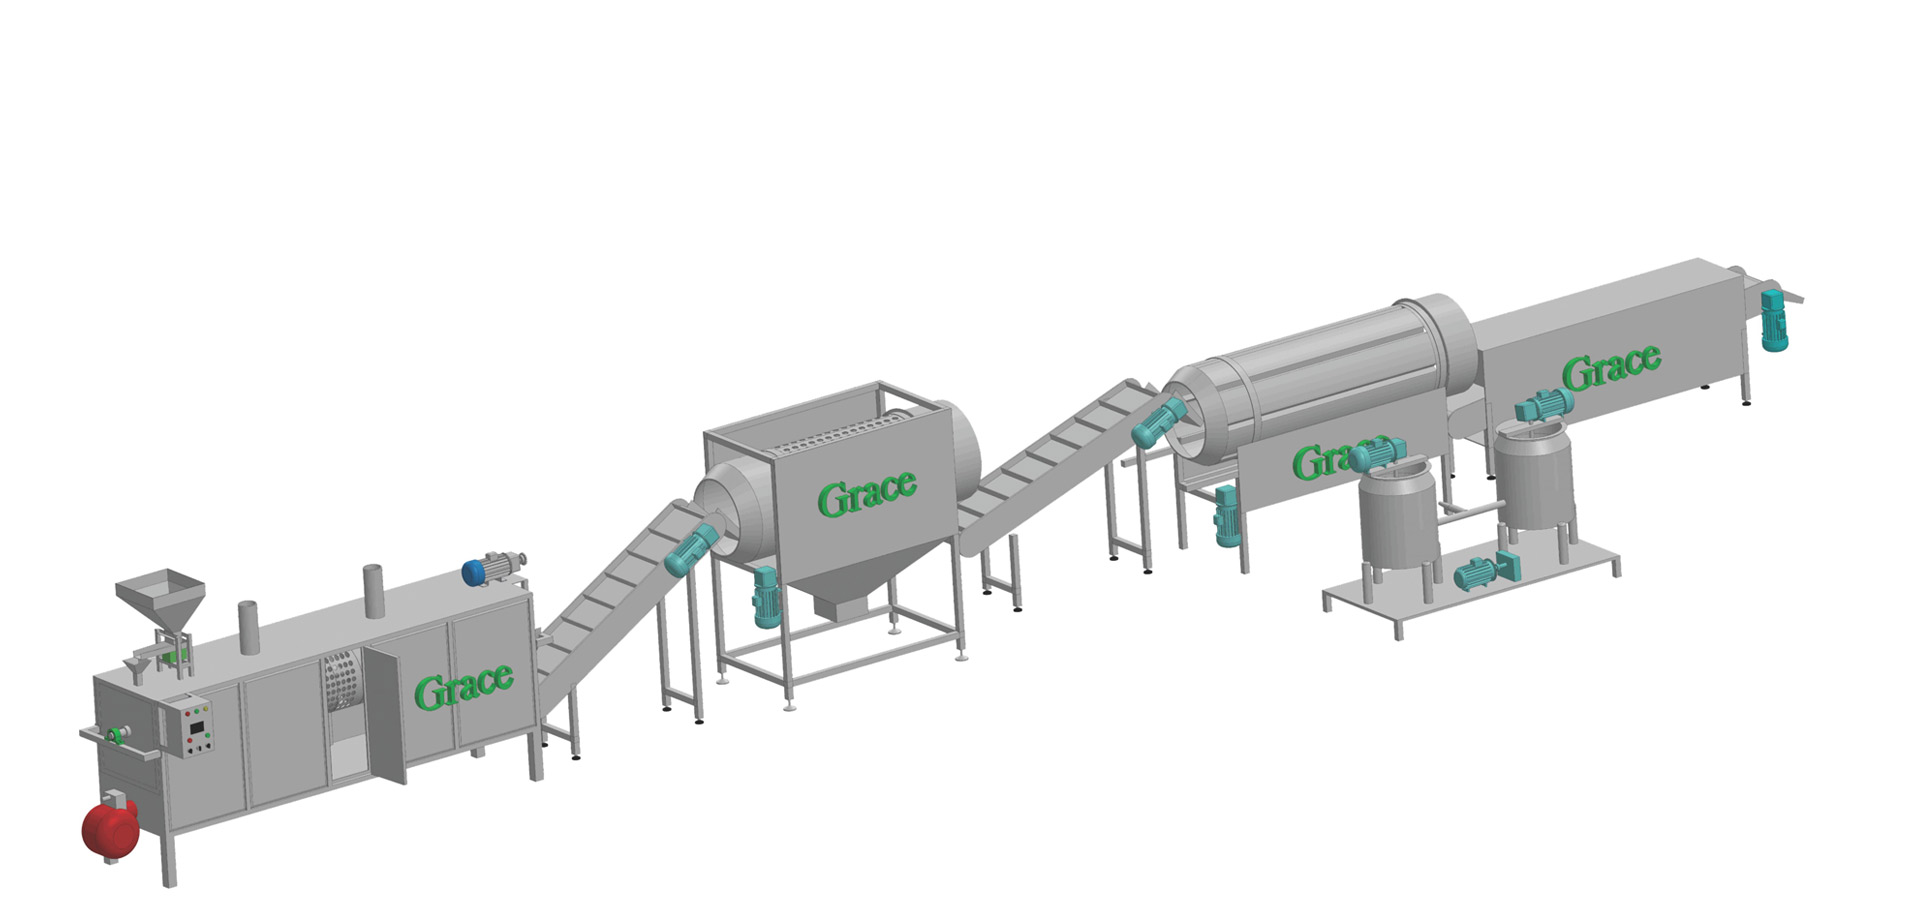 Food Processing Machine Supplier  Food Manufacturing Machinery Manufacturer